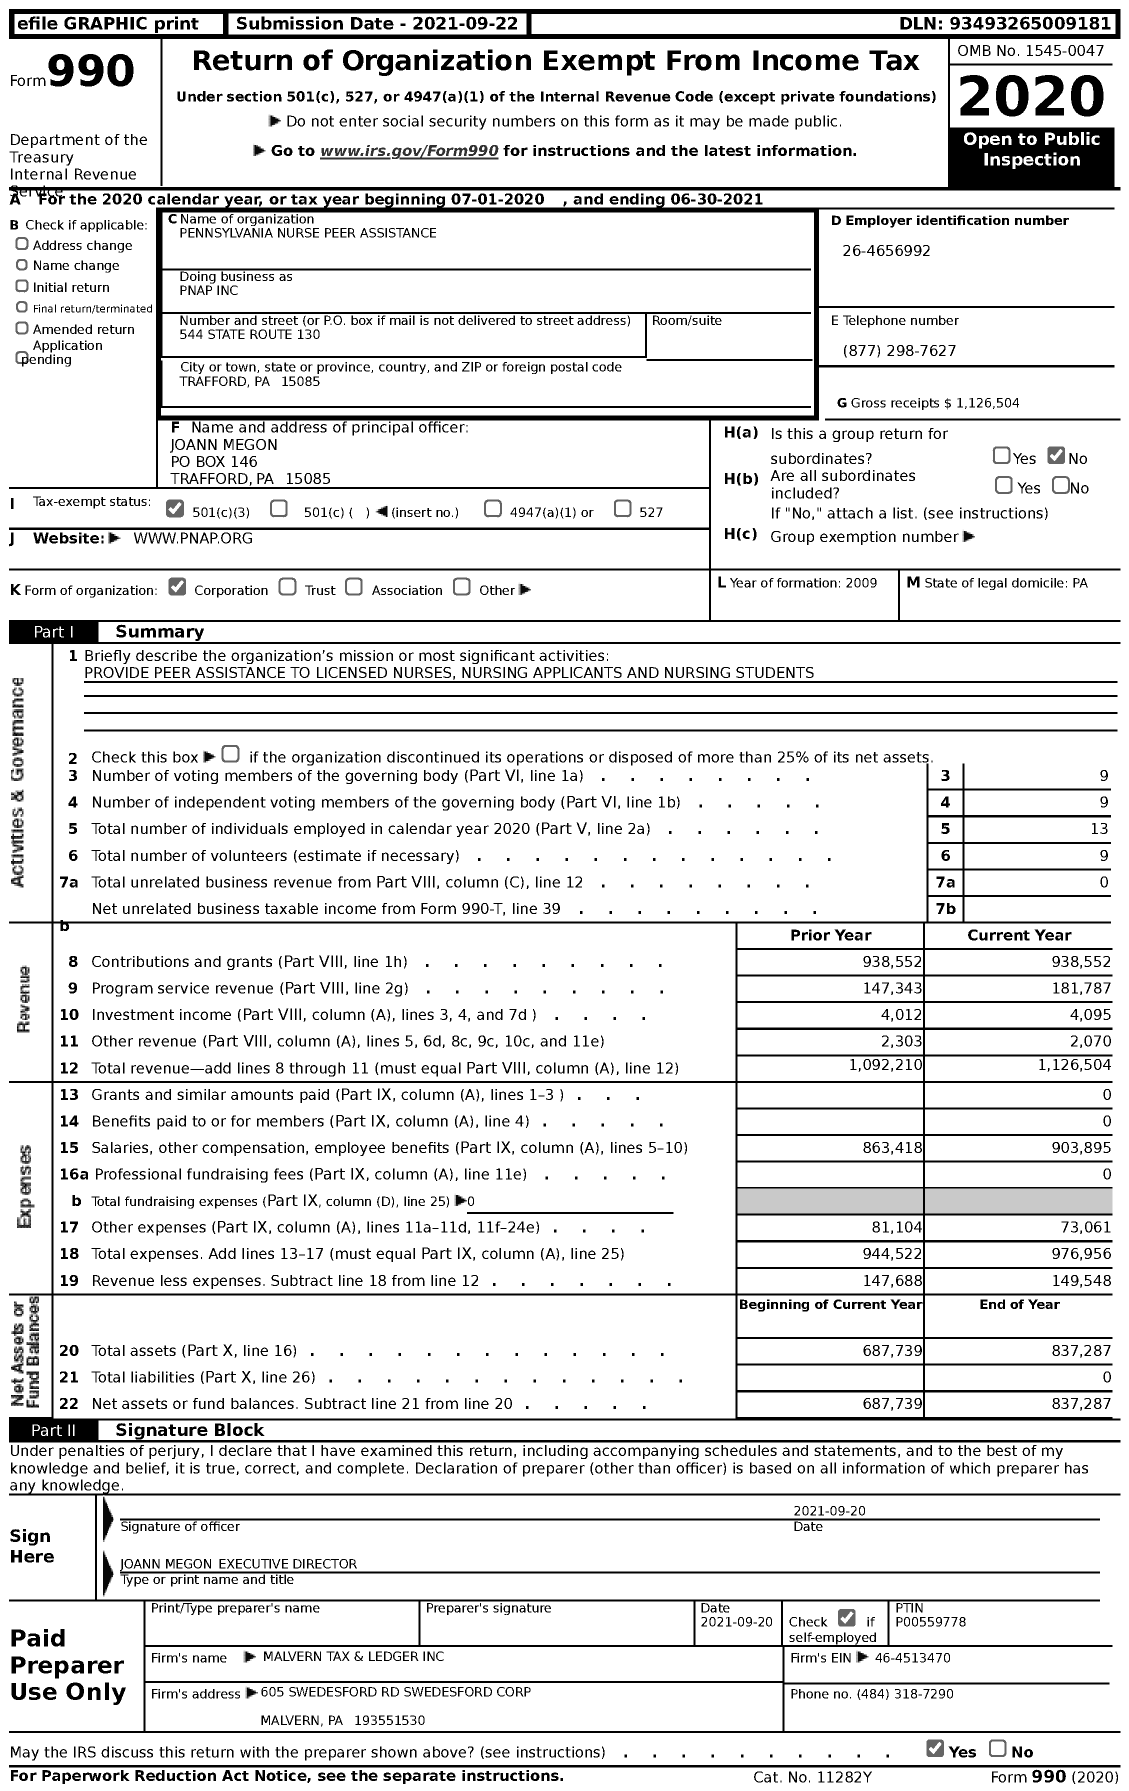 Image of first page of 2020 Form 990 for Pennsylvania Nurse Peer Assistance Program (PNAP)